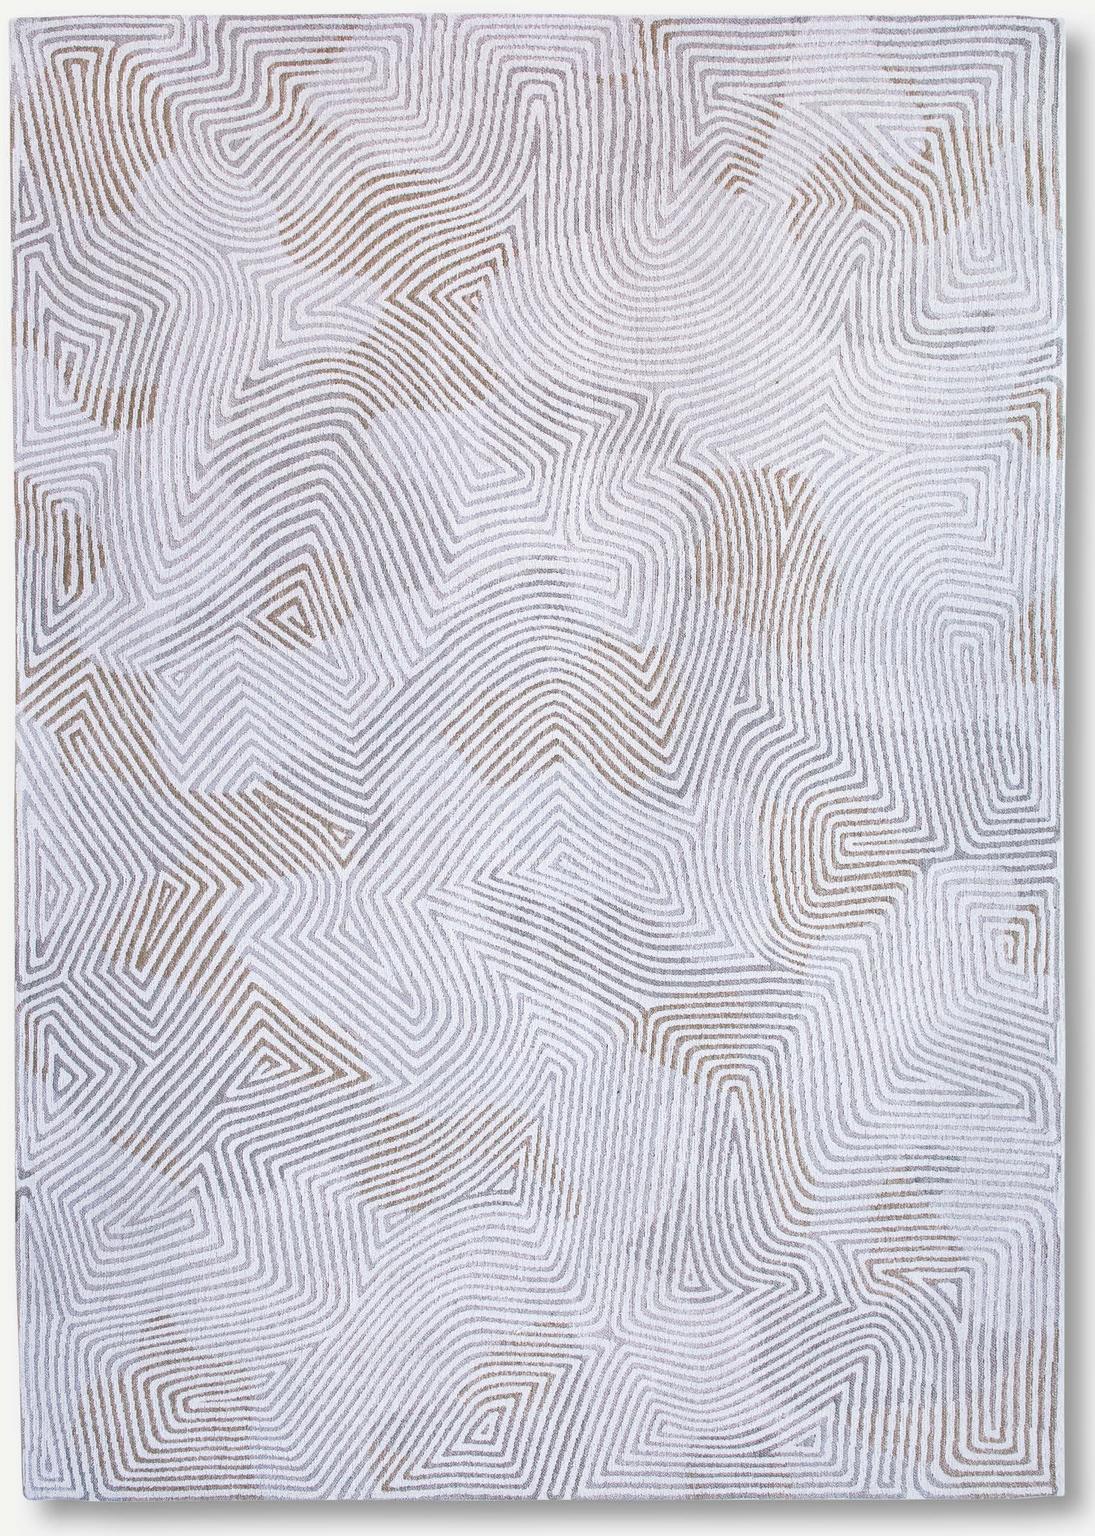 White Flatwoven Rug ☞ Size: 2' 7" x 5' (80 x 150 cm)